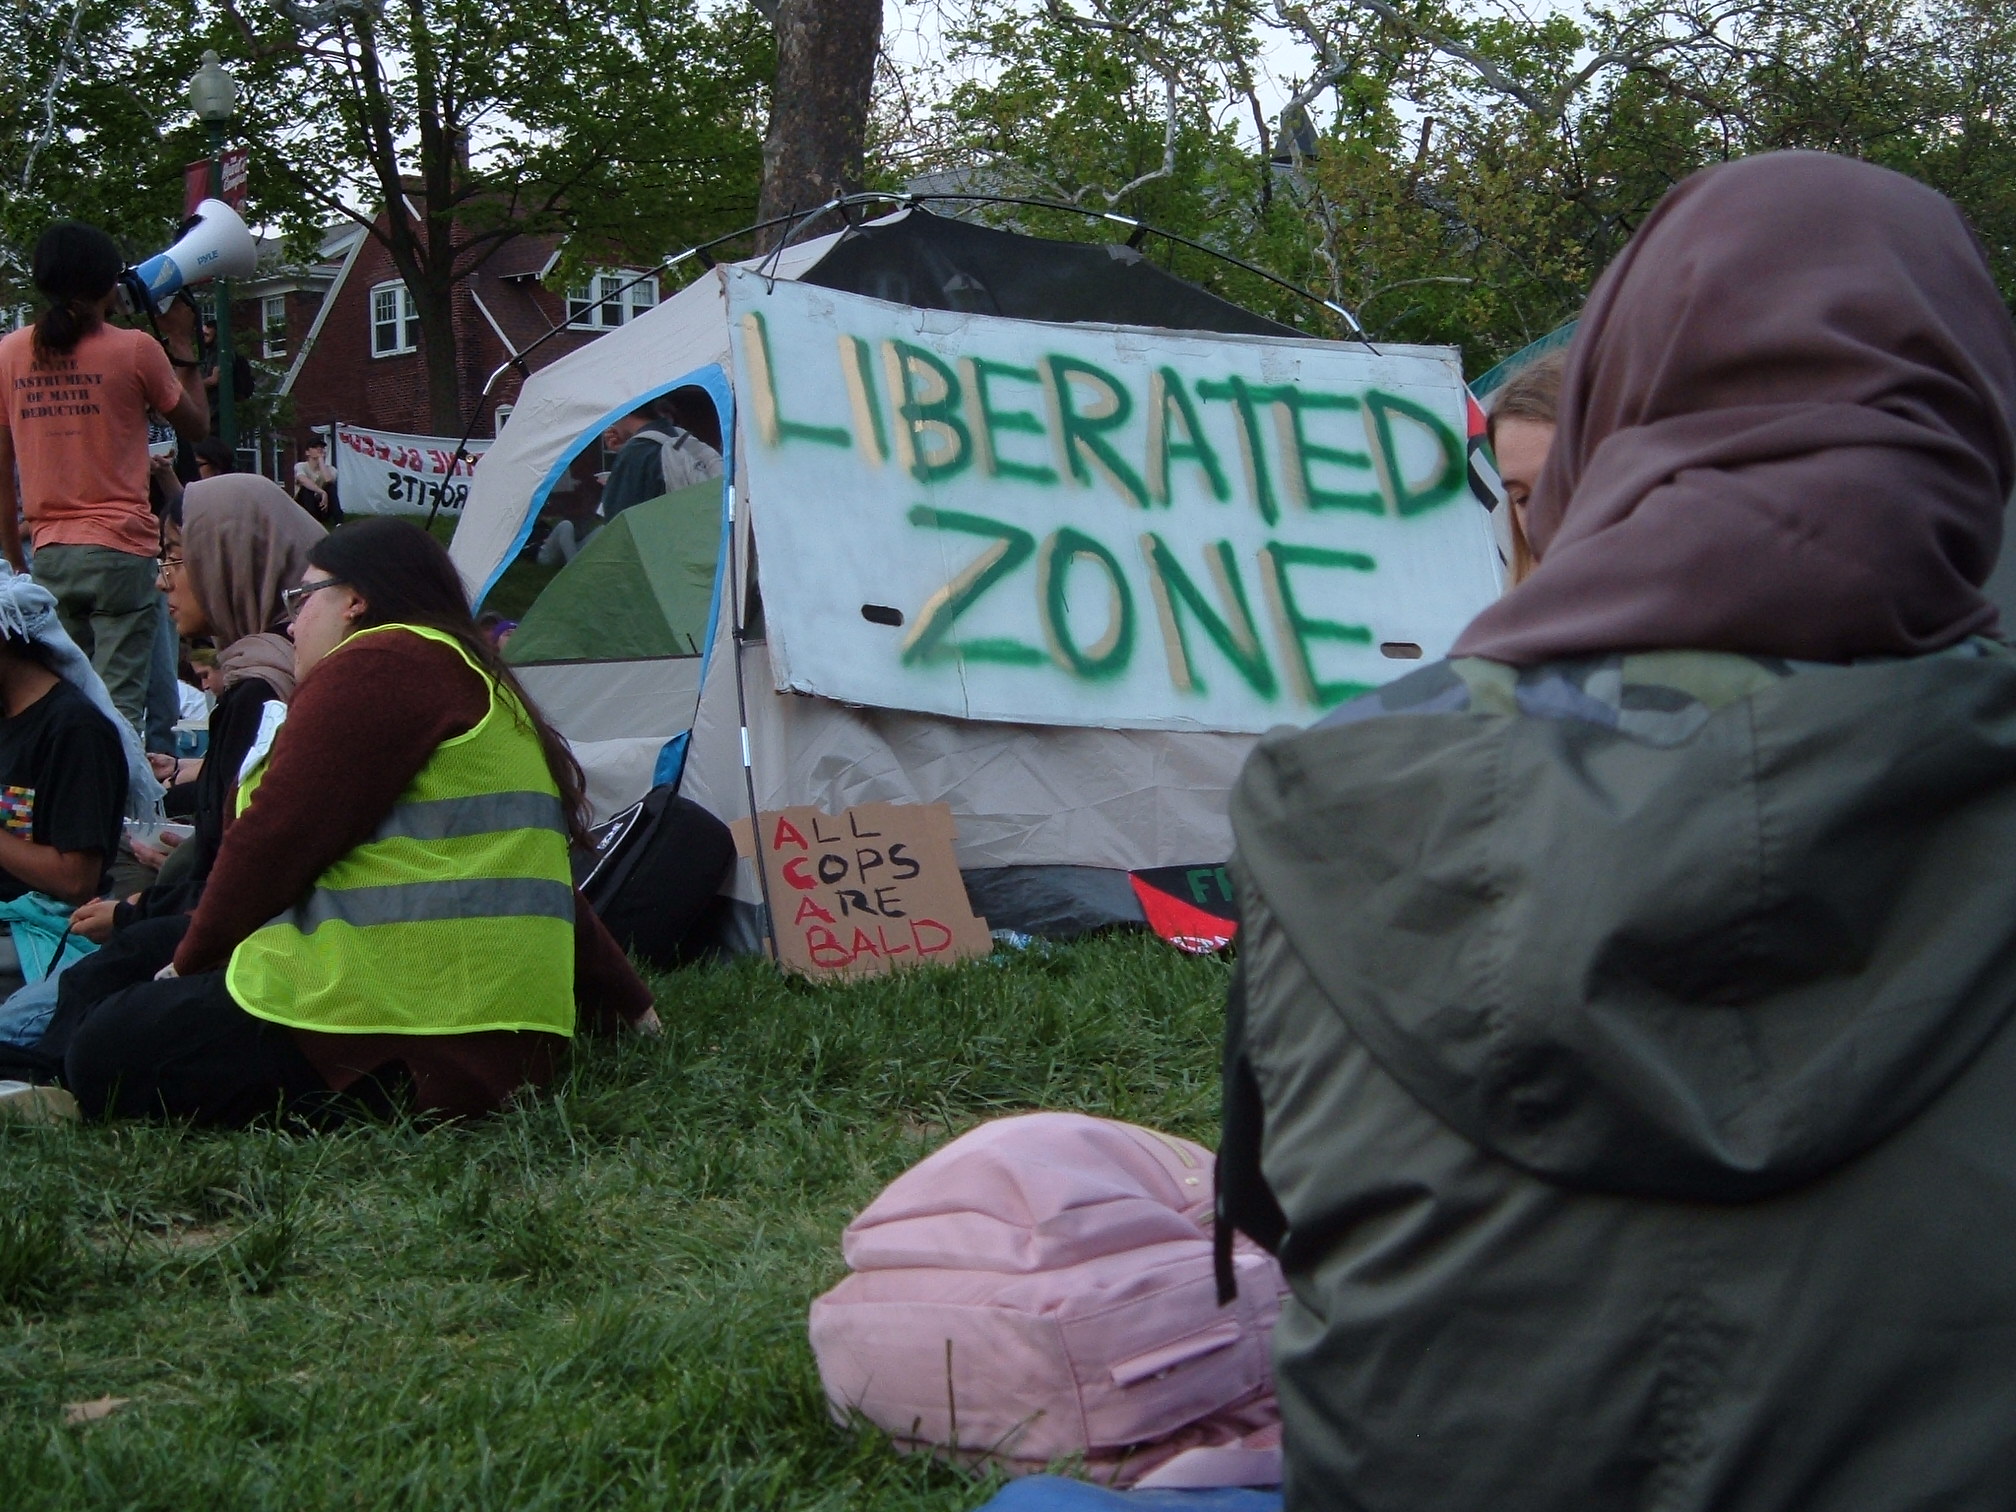 Protestors sit and chat on the grass in the encampment. A sign that says 'Liberated Zone' in green and gold letters is affixed to a tent. Below that is a sign that reads 'All Cops Are Bald' in red and black letters.